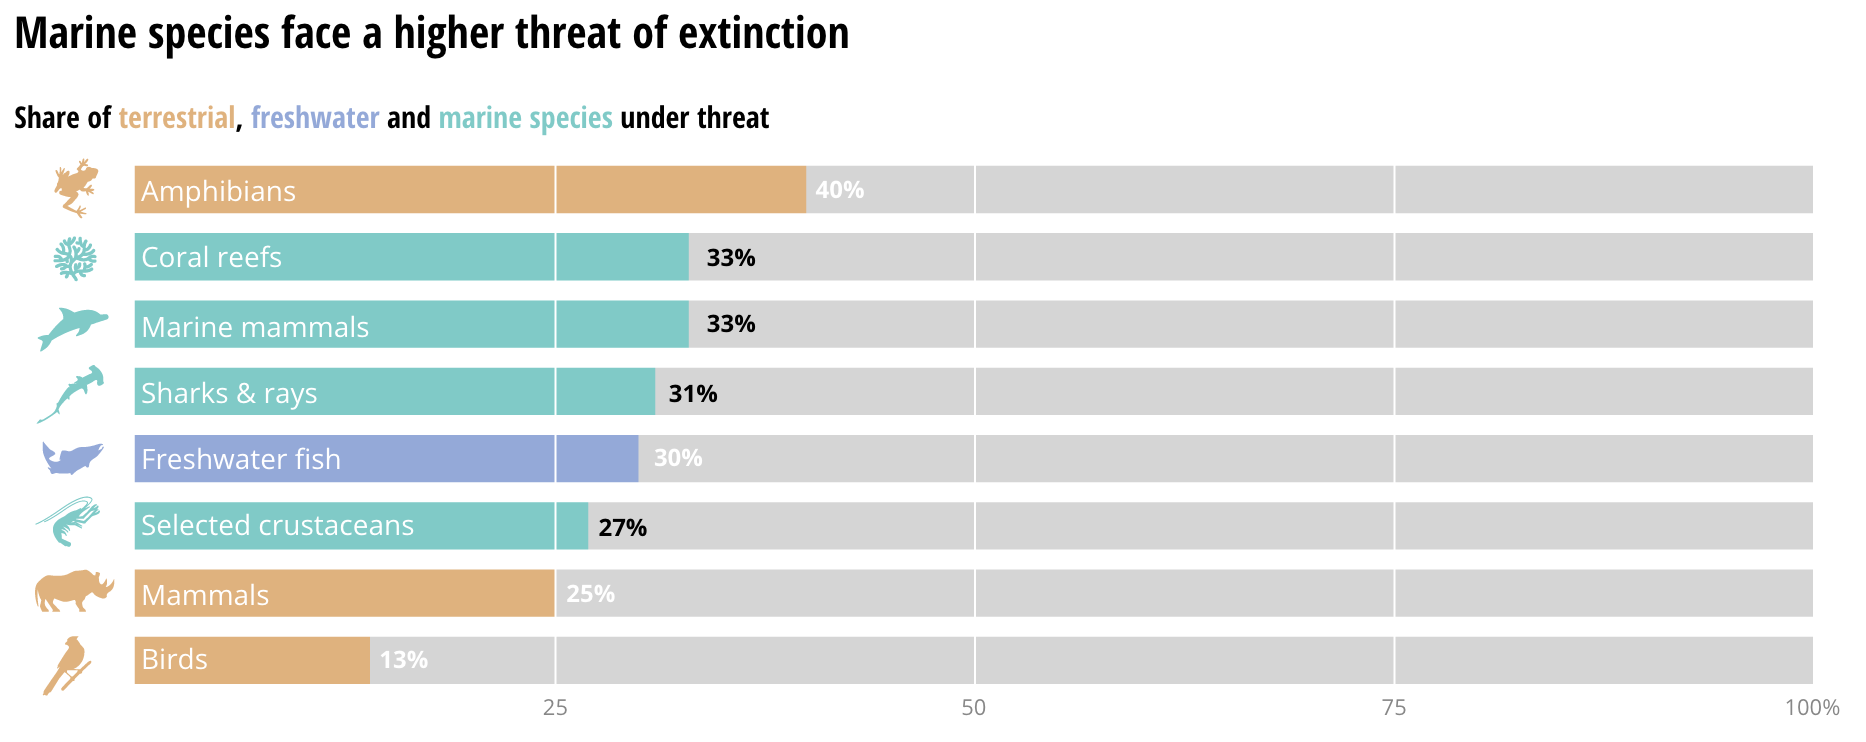 A horizontal bar chart titled 'Marine species face a higher threat of extinction', showing the share of threatened species of different groups of animals. The groups are illustrated by silhouettes and the colours indicate terrestrial, freshwater and marine groups of species